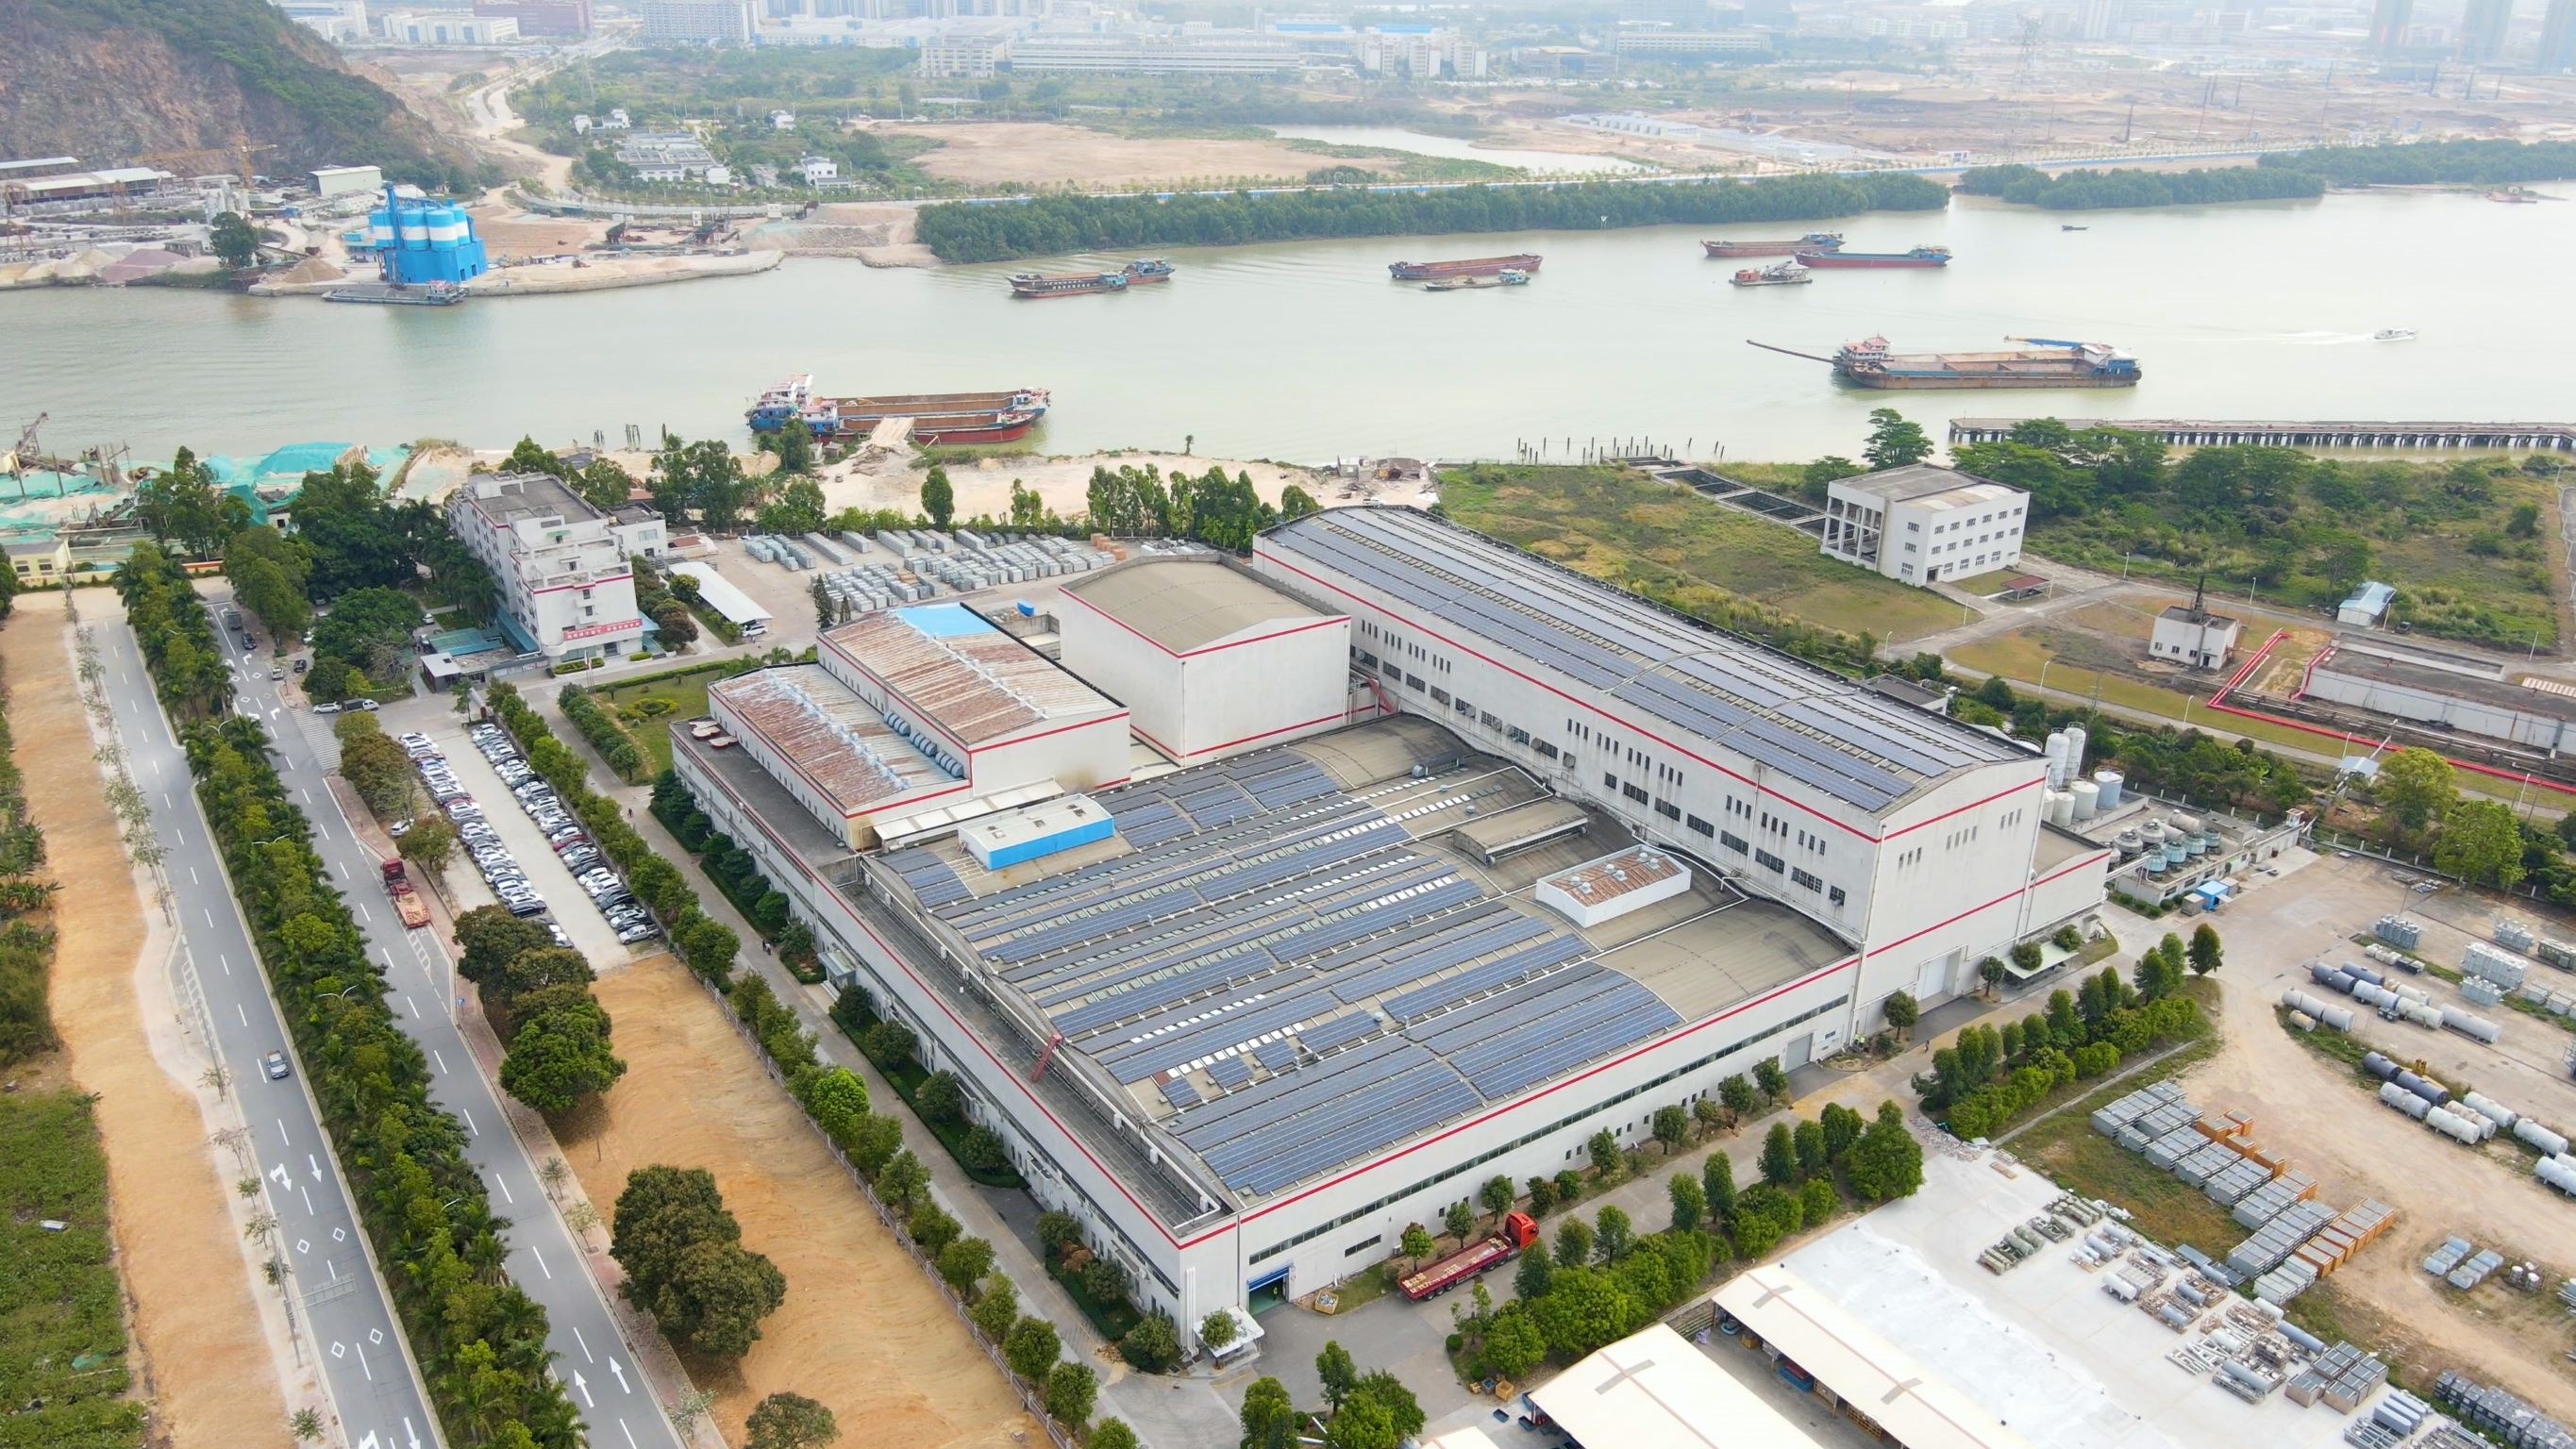 Press release image - China Facility with solar panels v3